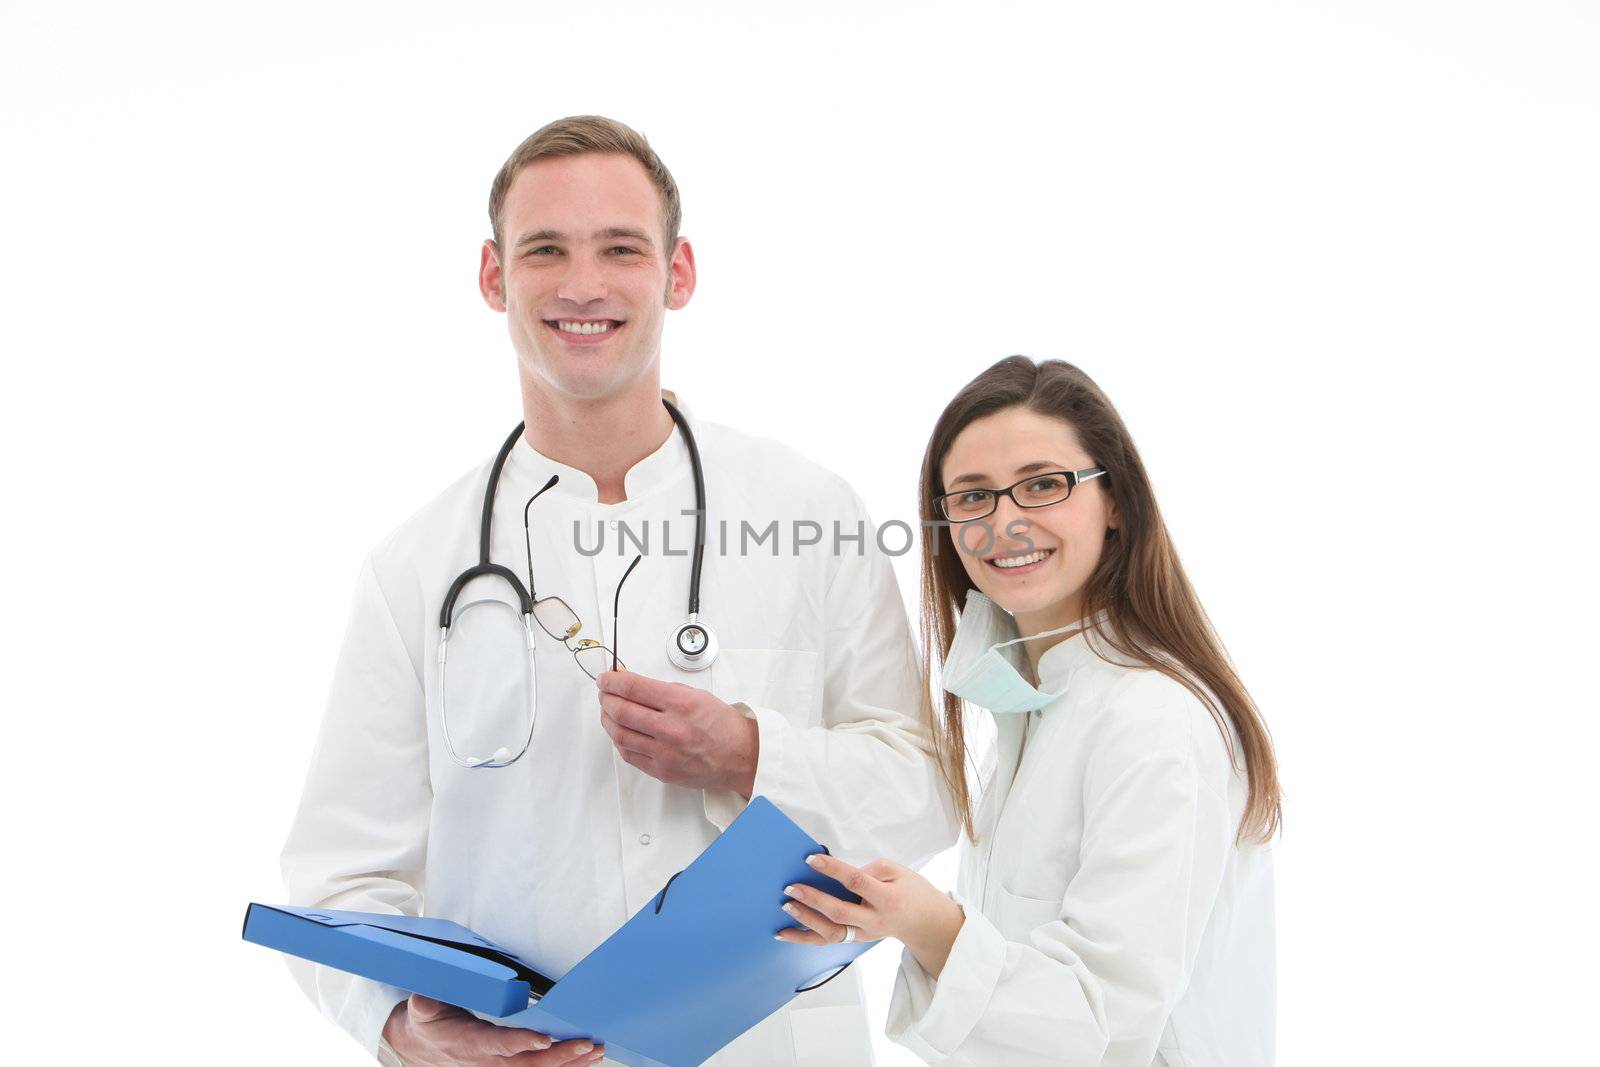 Smiling young male doctor and his female assistant or nurse standing holding a blue folio discussing patient records